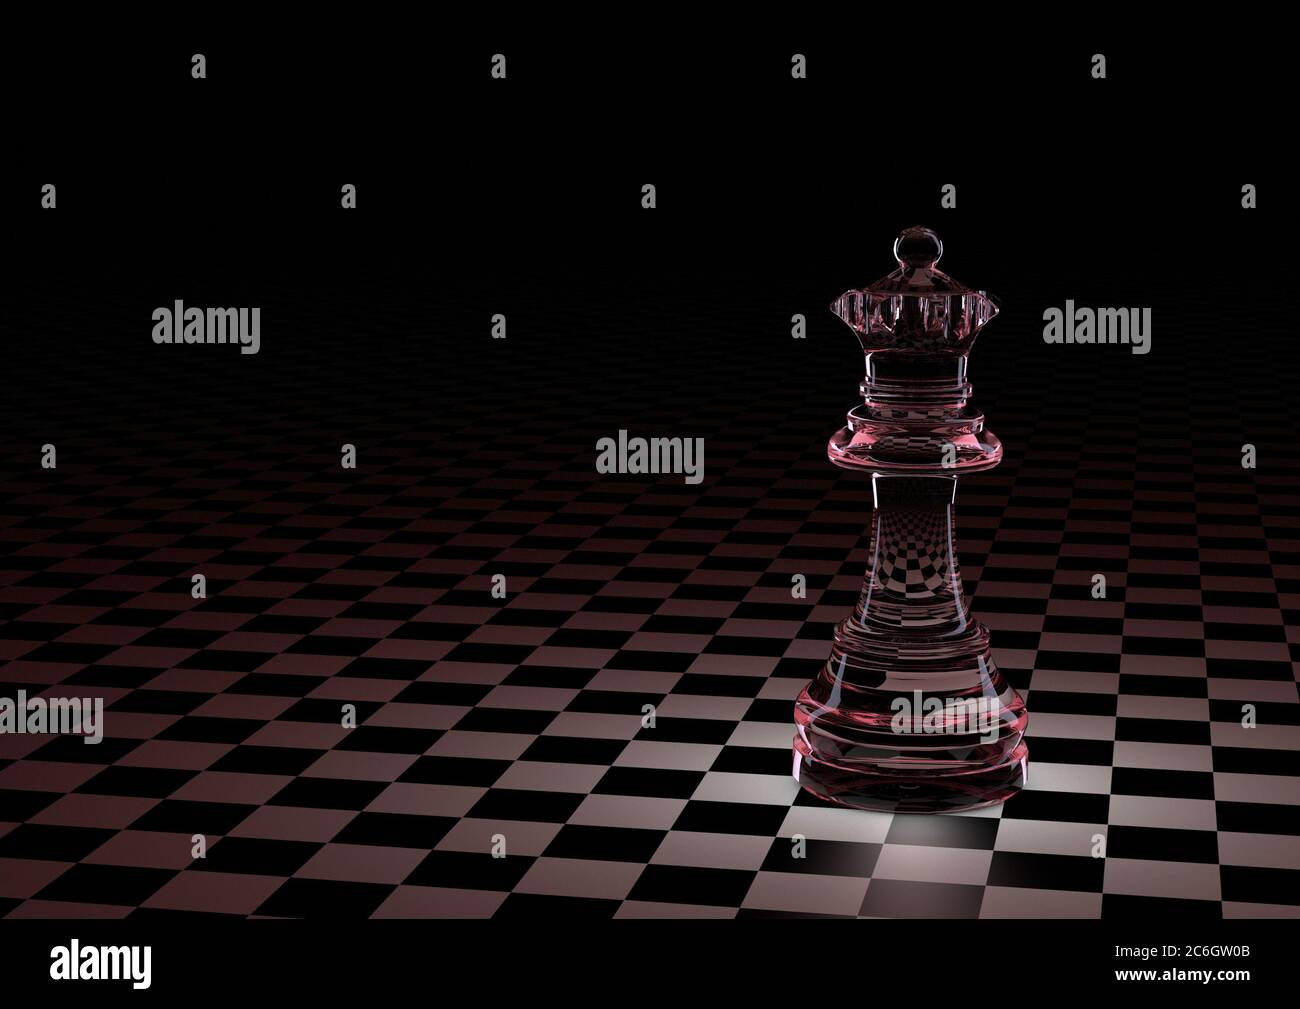 3D illustration. Chess piece Queen of glass on the Board in a small cage. With red, Burgundy backlight. On a black background. The concept of board games, logic, training for the brain. Stock Photo